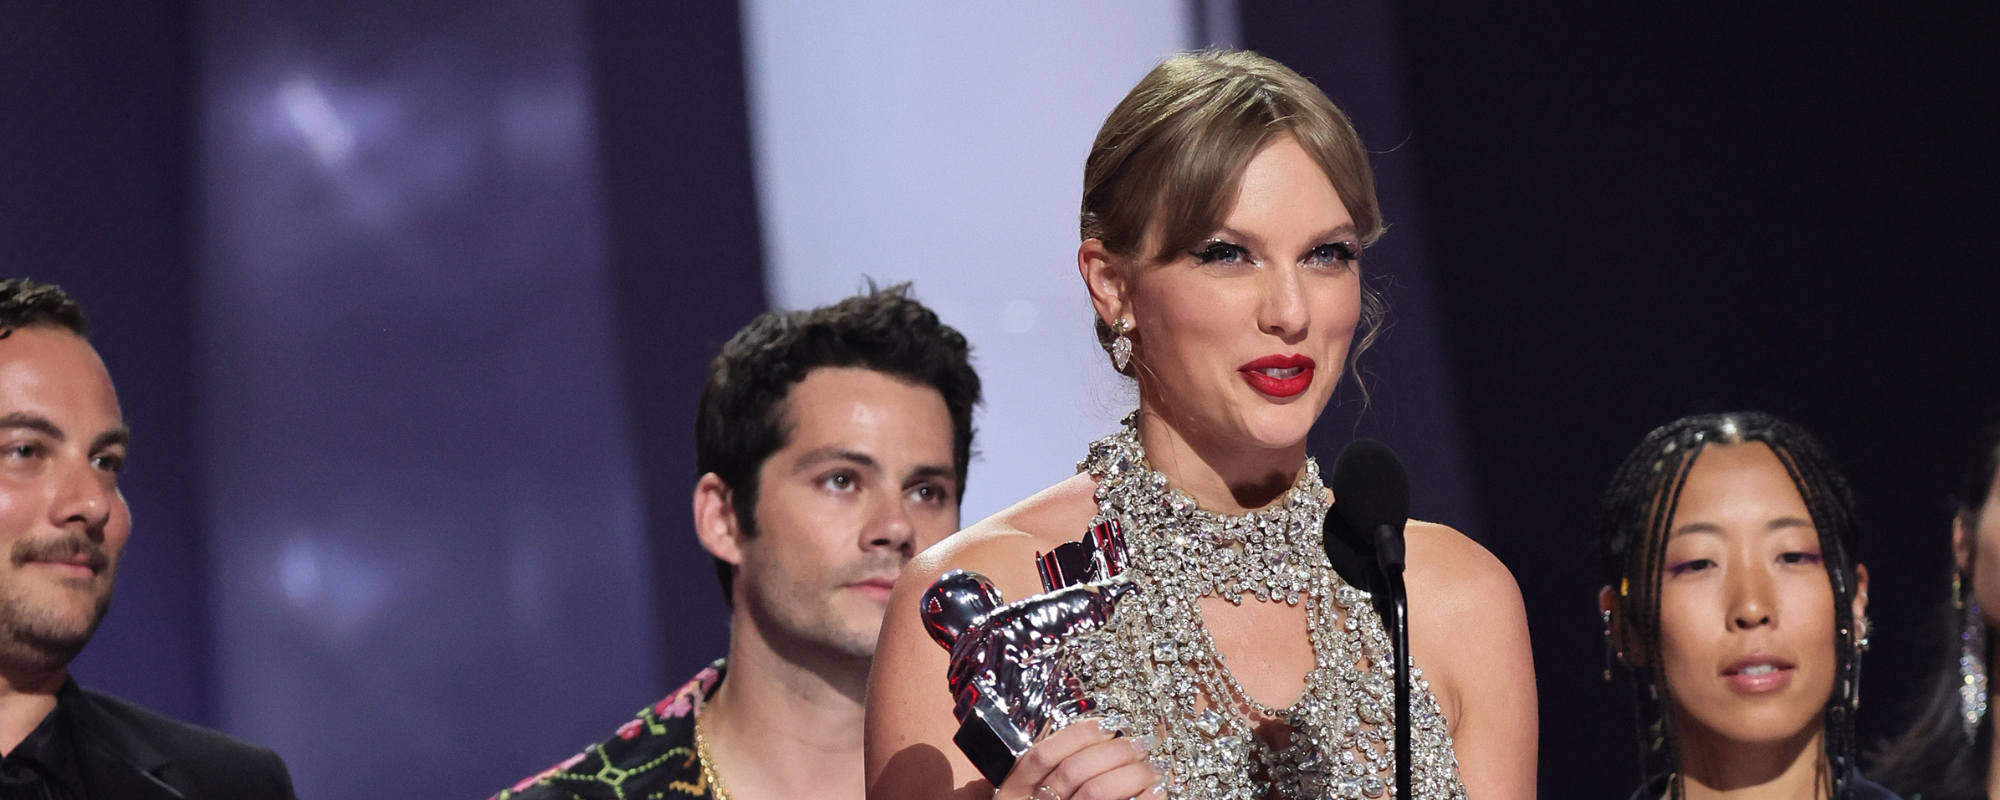 A Deep Dive into 5 “Taylor’s Version” Songs That Are Even Better Than the Originals